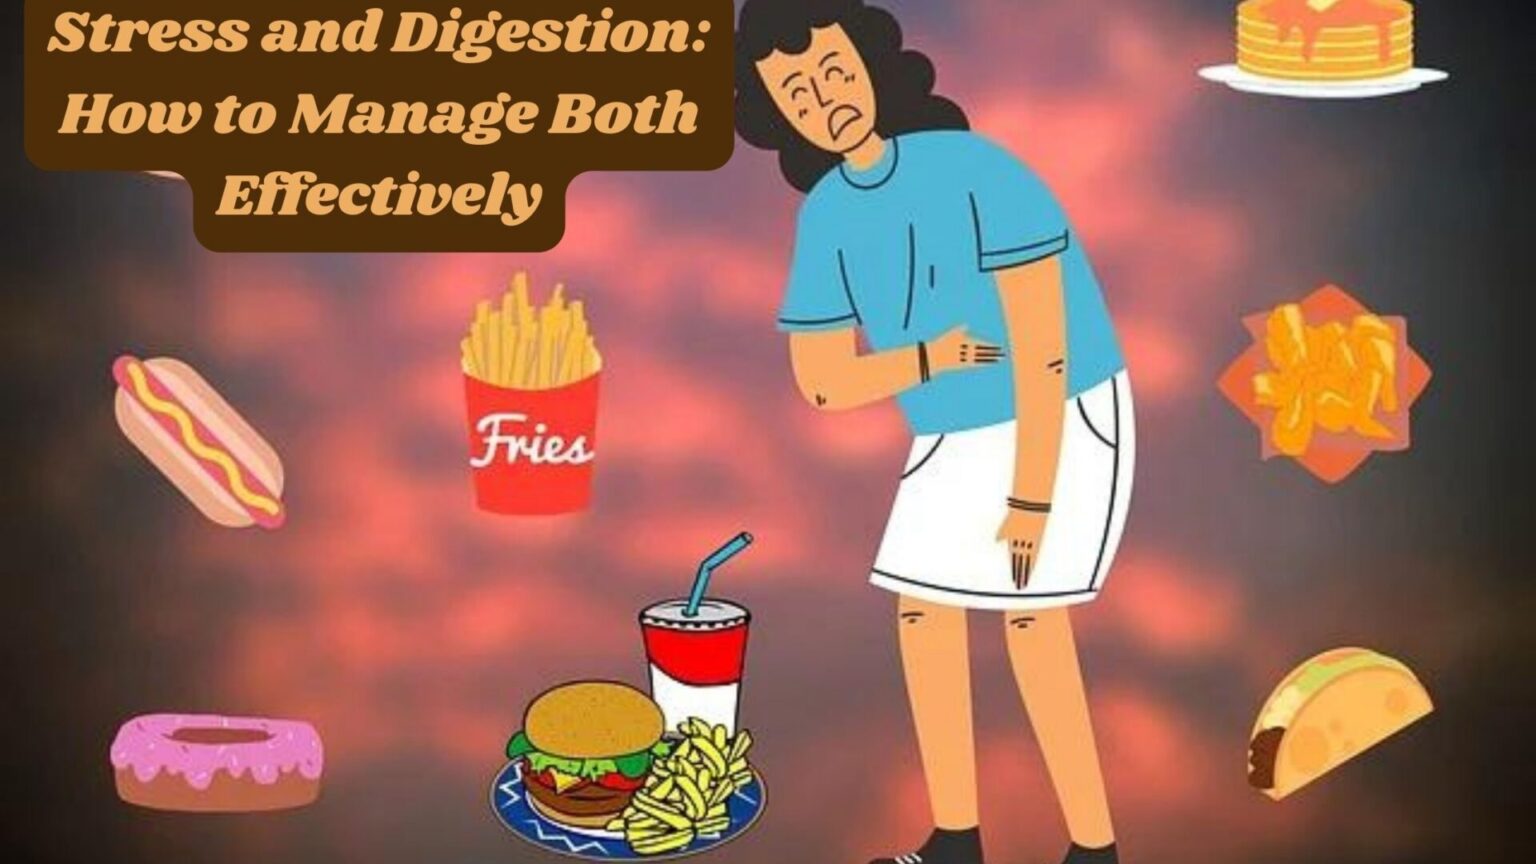 Stress and Digestion: How to Manage Both Effectively